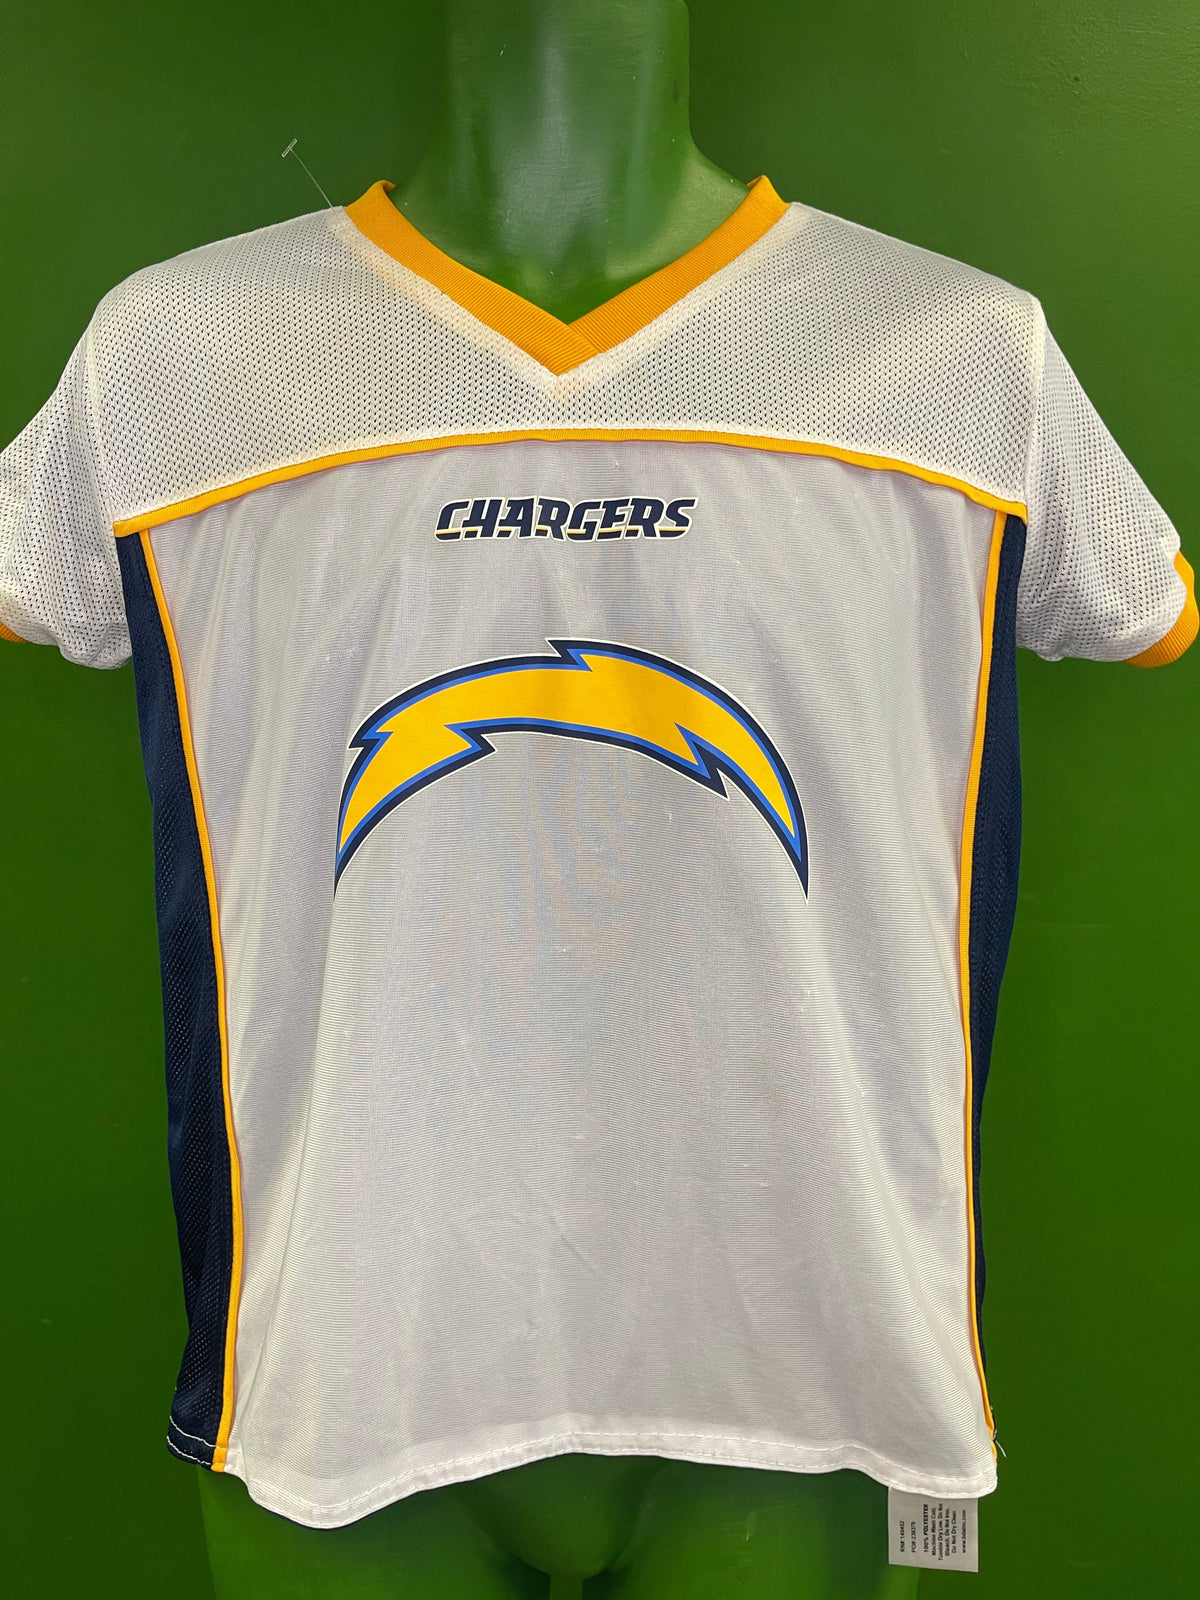 NFL Los Angeles Chargers Flag Football Jersey Youth Large 14-16